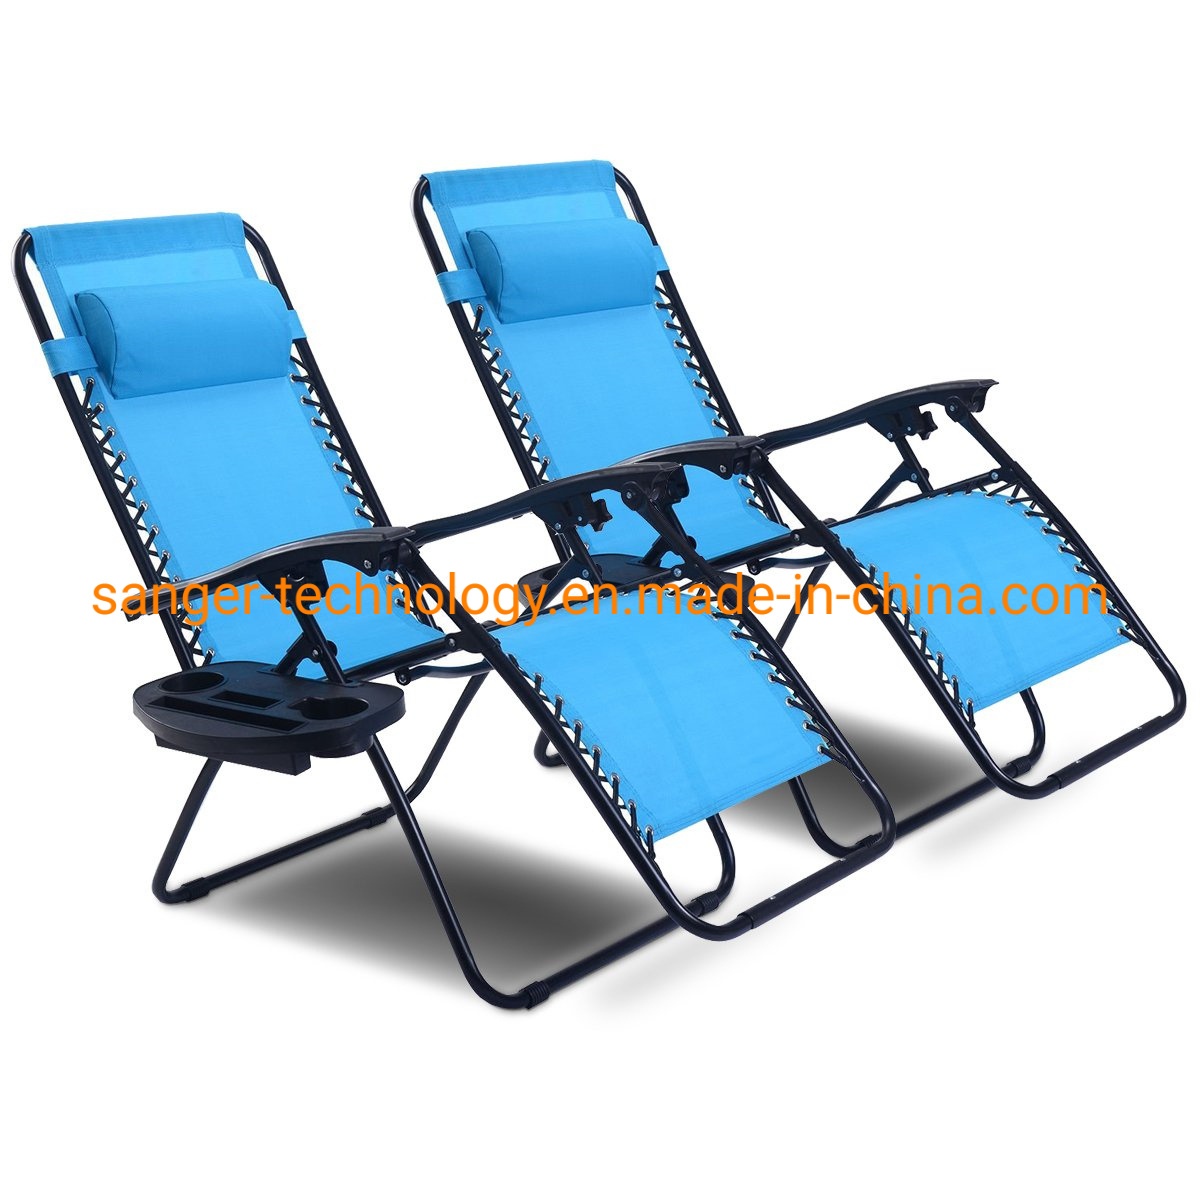 Hot Item Goplus Zero Gravity Chair Adjustable Folding Lounge Recliners For Patio Outdoor Yard Beach Pool Wcup Holder 300 Lb Weight Capacity Light for measurements 1200 X 1200